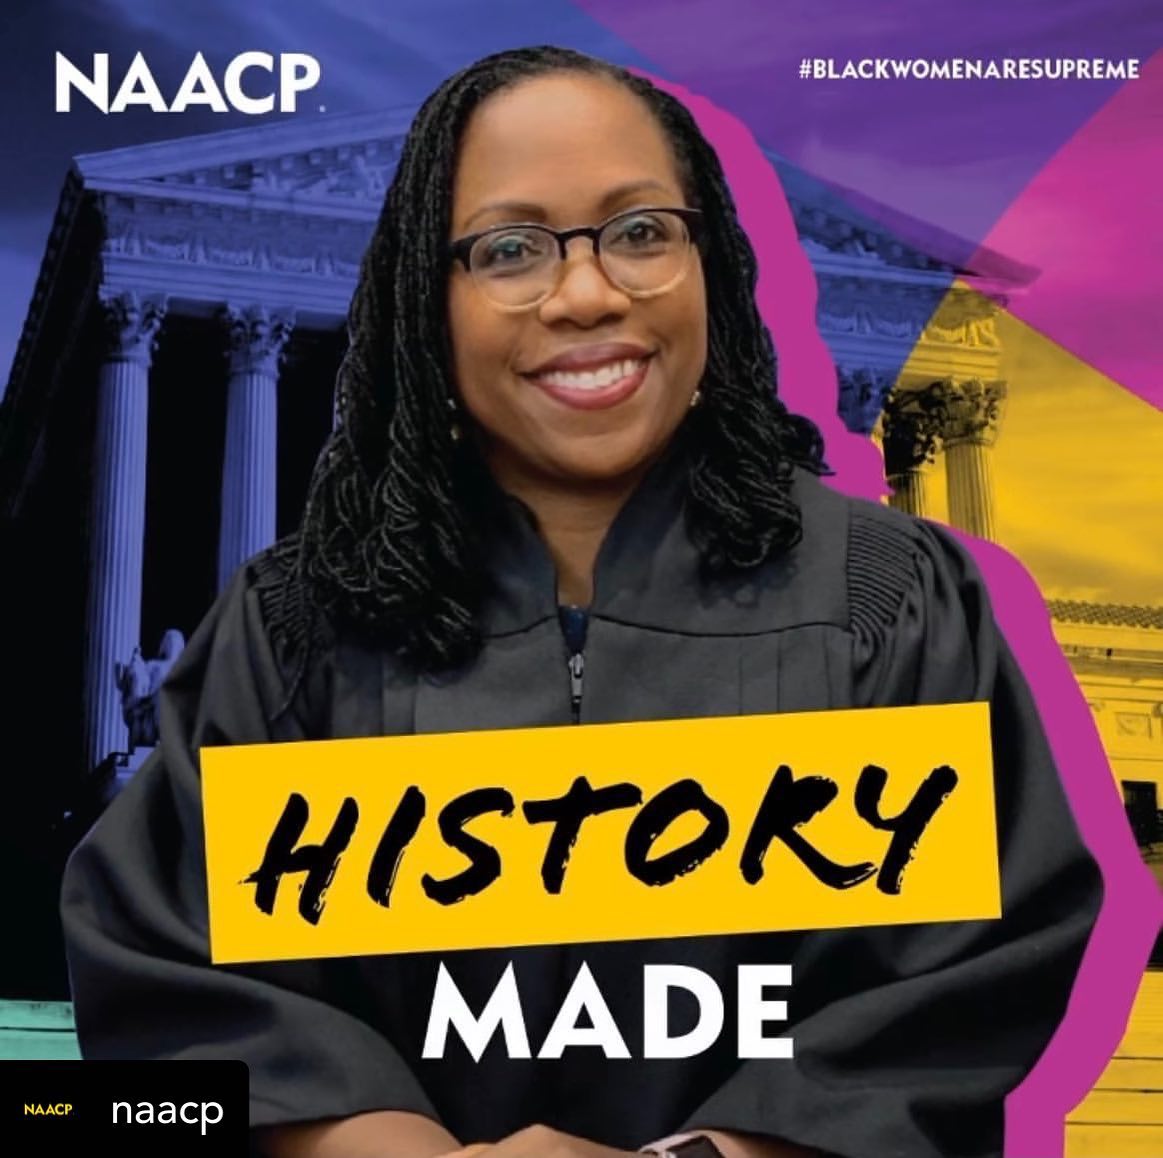 The prayers of ancestors is now our hope for today, and a path for our future! 

After:
-200 plus years of establishing The U.S. Supreme Court 
-115 appointed Supreme Court Justices
-A Senate vote of 53-47 in April 2022

We can officially celebrate Justice Ketanji Brown Jackson as the FIRST BLACK FEMALE appointed to The United States Supreme Court. 

#NAACP #JusticeKetanjiBrownJackson
#U.S.SupremeCourt
#BlackLivesMatter
#BlackRepresentation 
#naacpcleveland